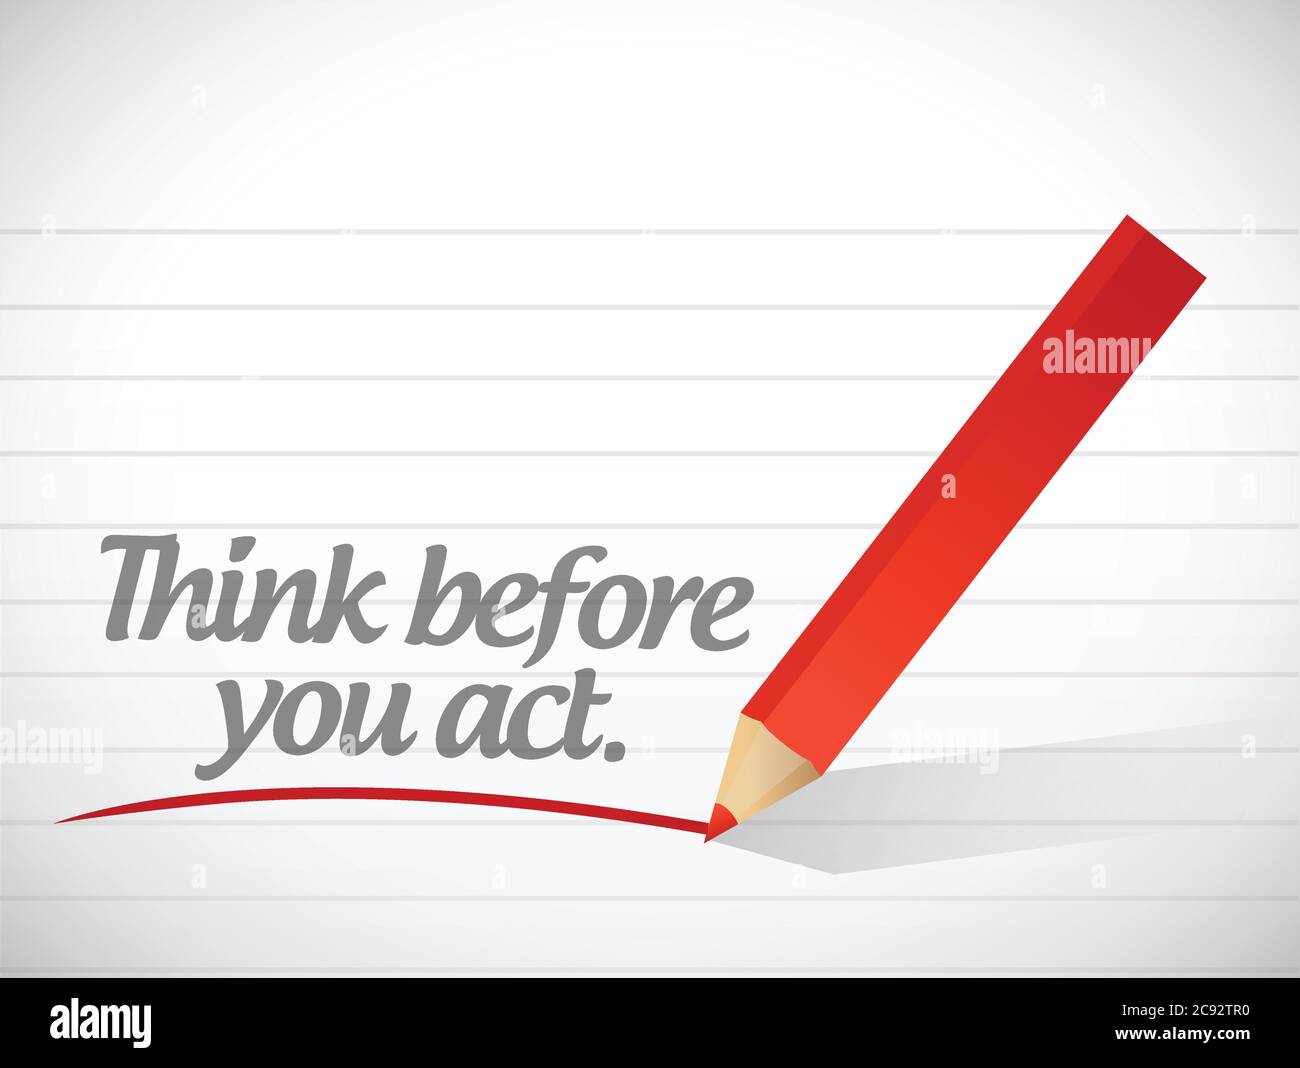 Think before you act written message illustration design over white Stock Vector